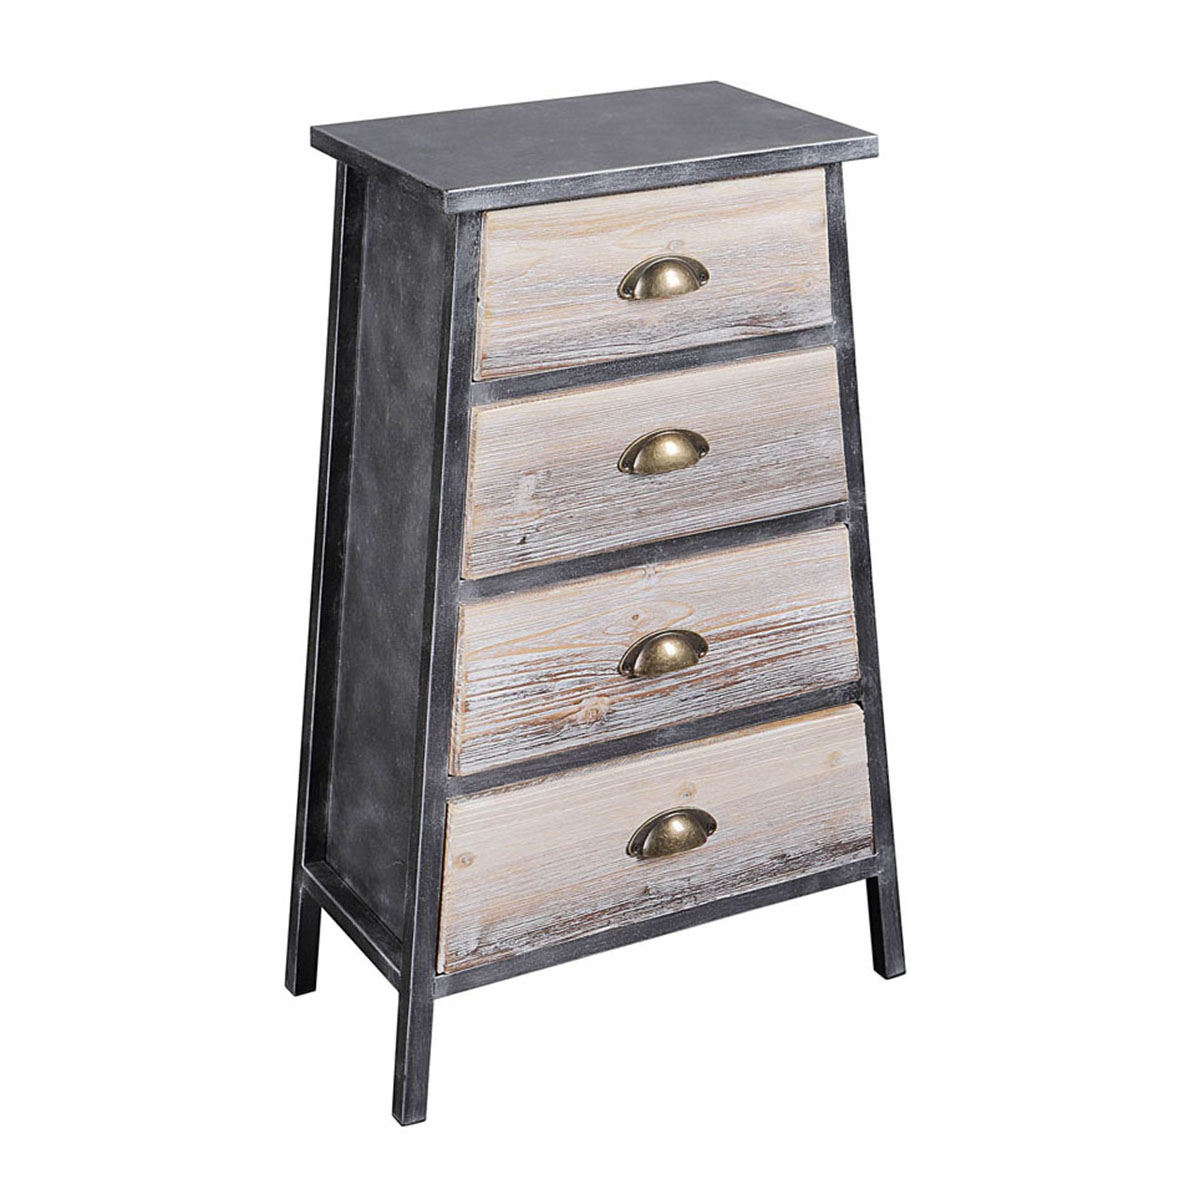 4D Concepts Claremont Collection 4-Drawer Chest